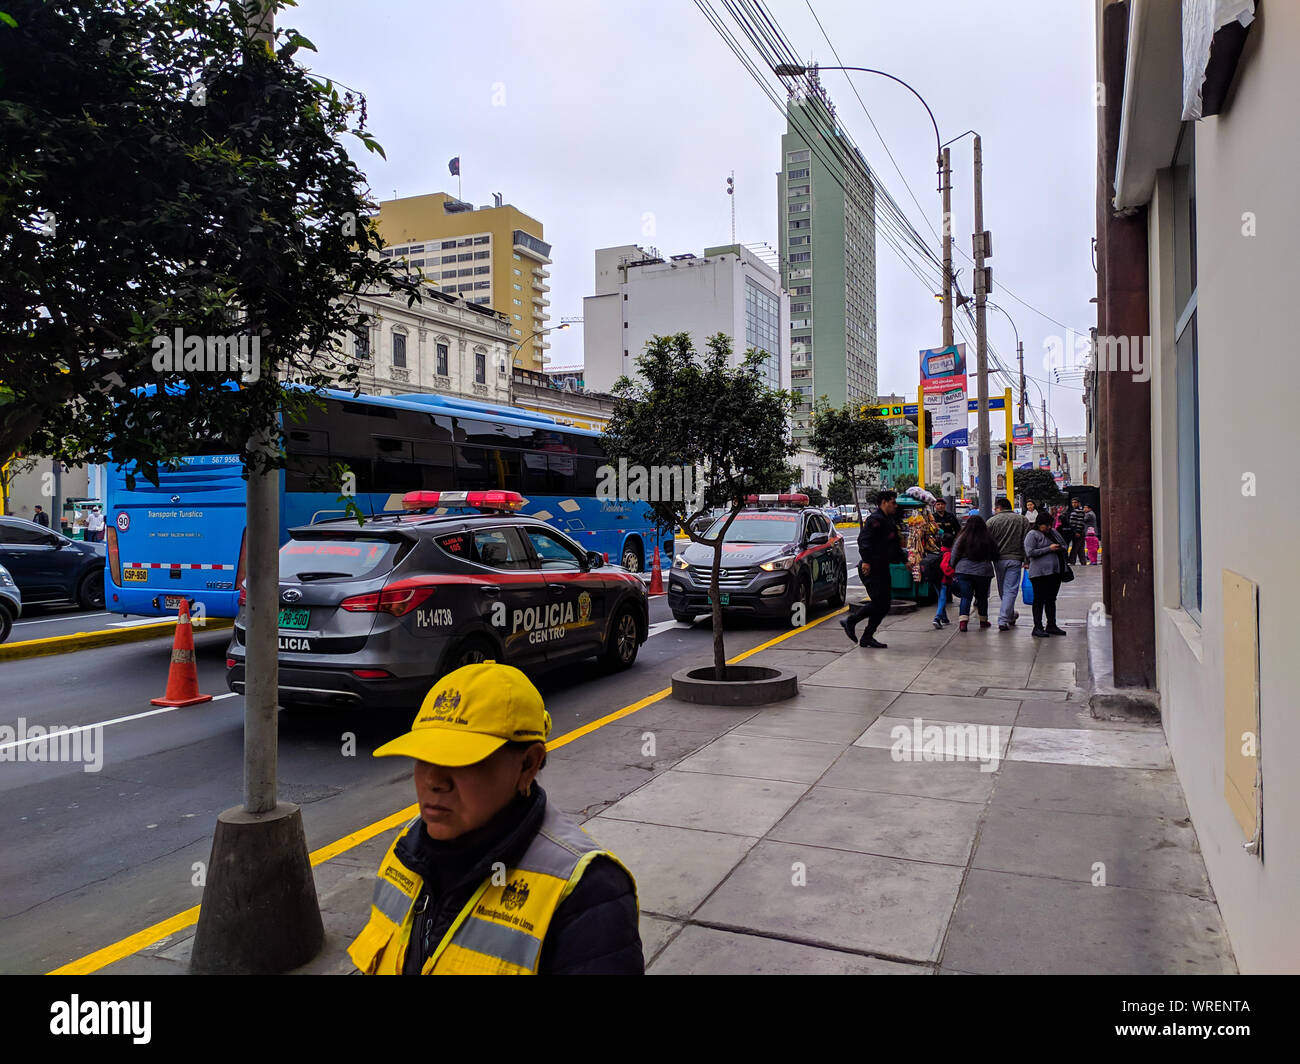 shooting at the Tacna avenue in Lima Peru, police arriving Stock Photo